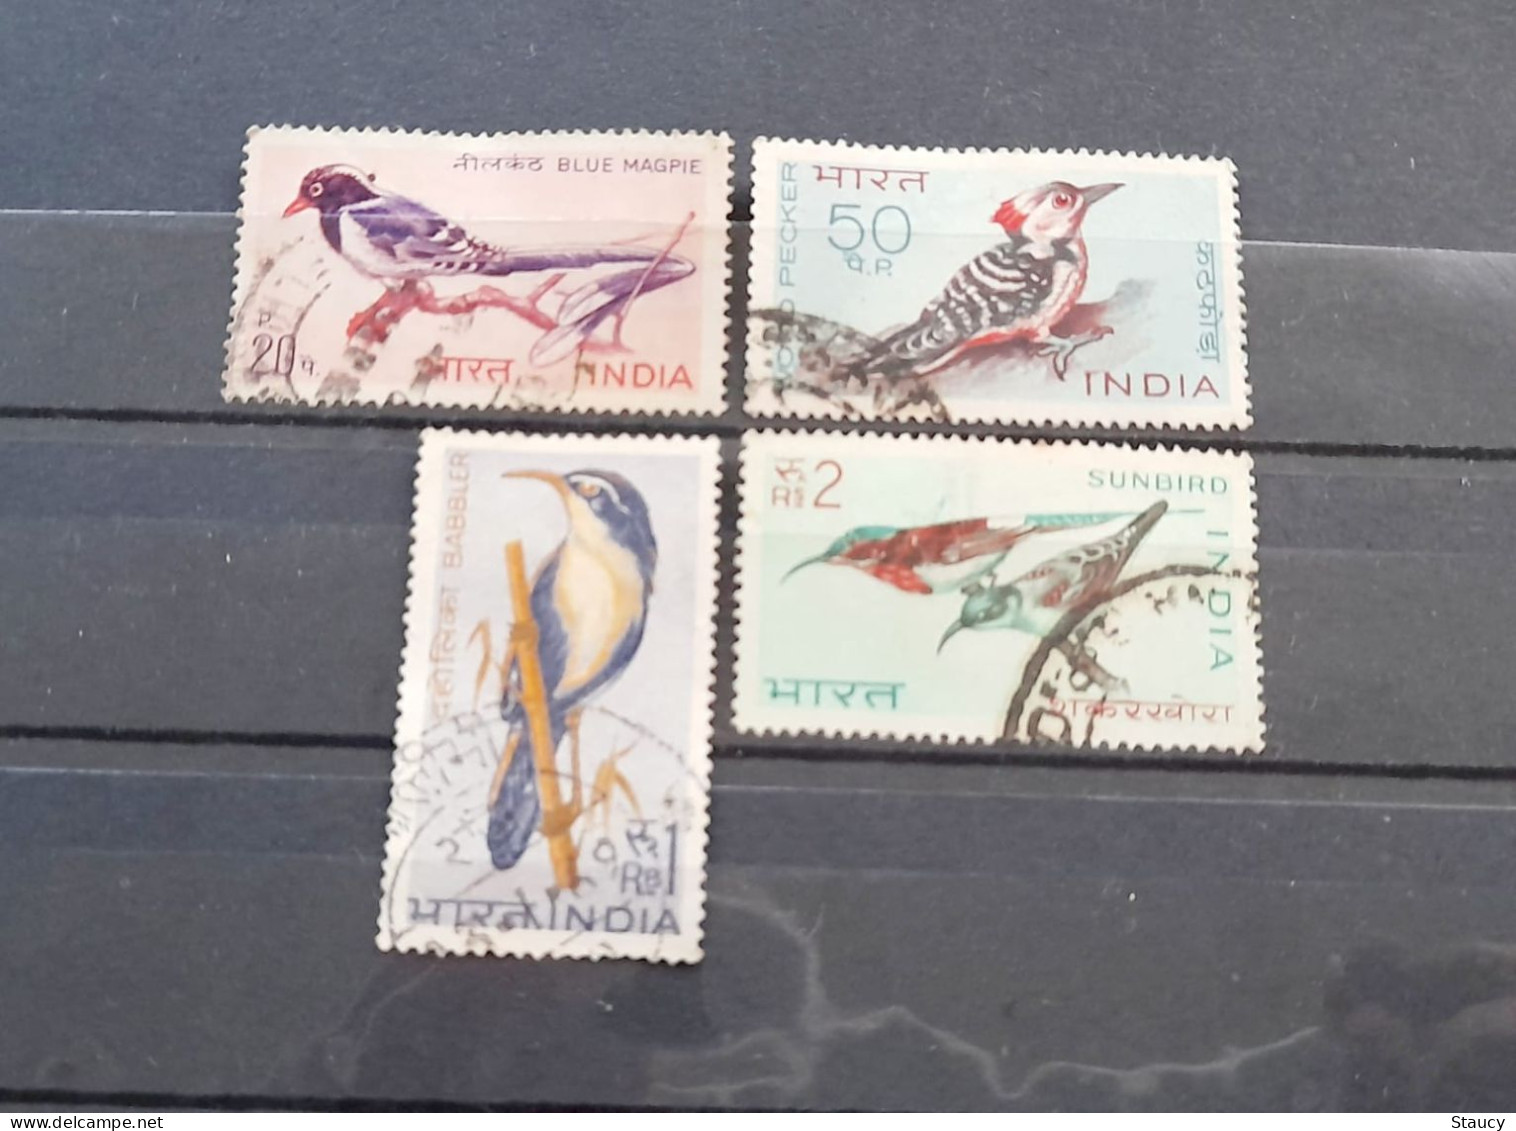 India 1968 BIRDS ~ Wildlife Preservation - Fauna / Birds Complete Set Of 4 Stamps USED (Cancellation Would Differ) - Usados